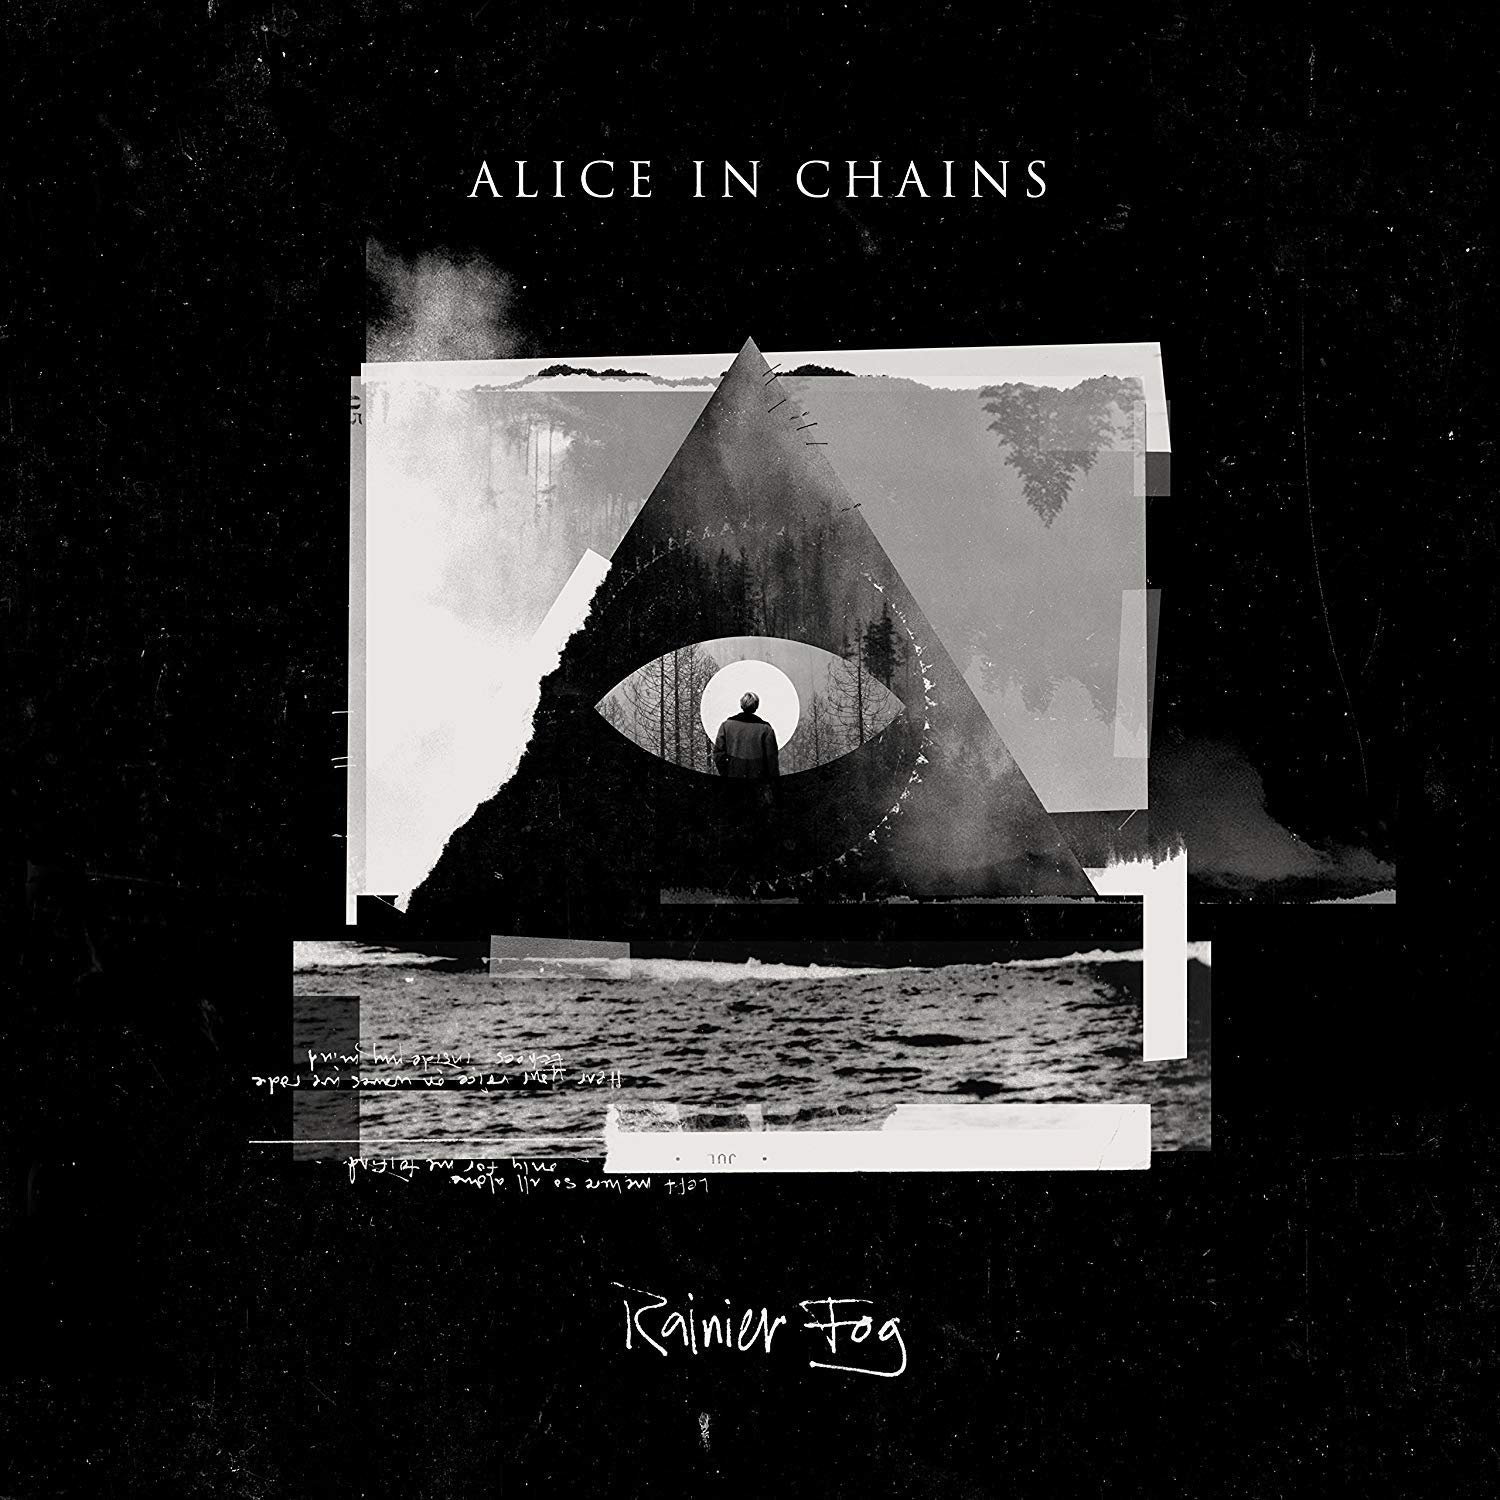 New & Noteworthy: August 24th, 2018: New Music in Chains